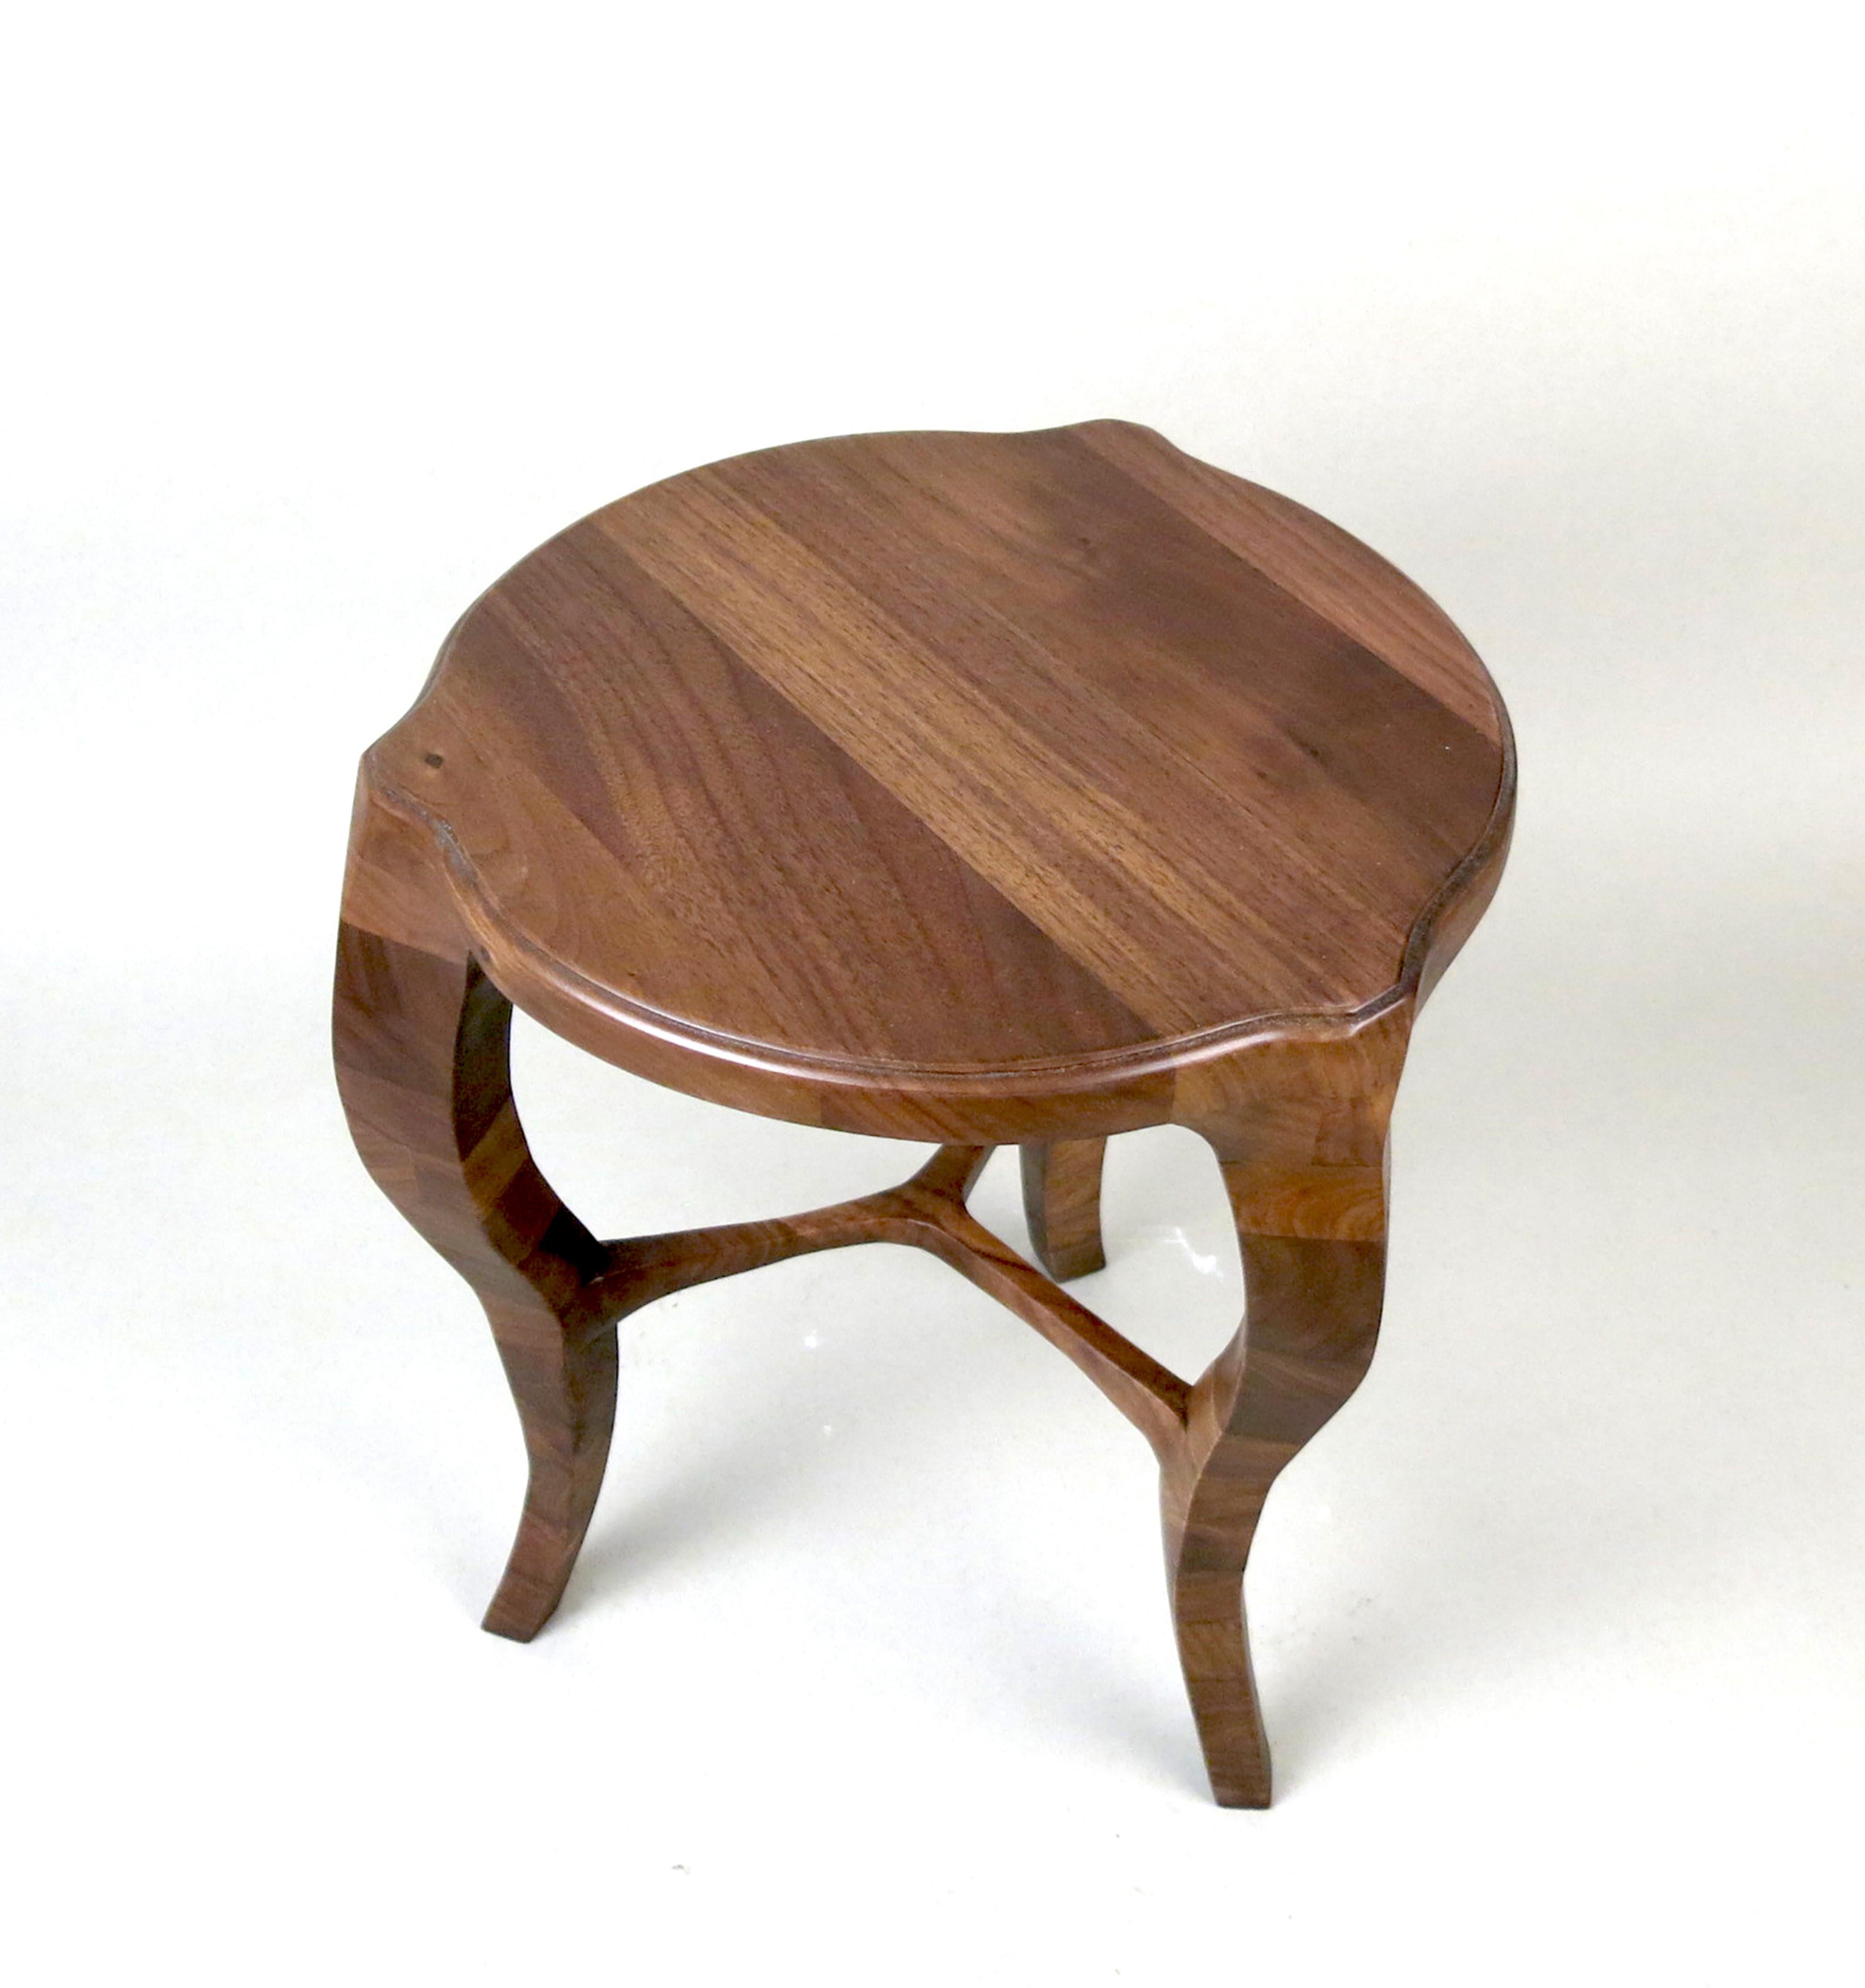 American Lxv Occasional Table, Handcrafted in Walnut with S-Curve Legs, in Stock